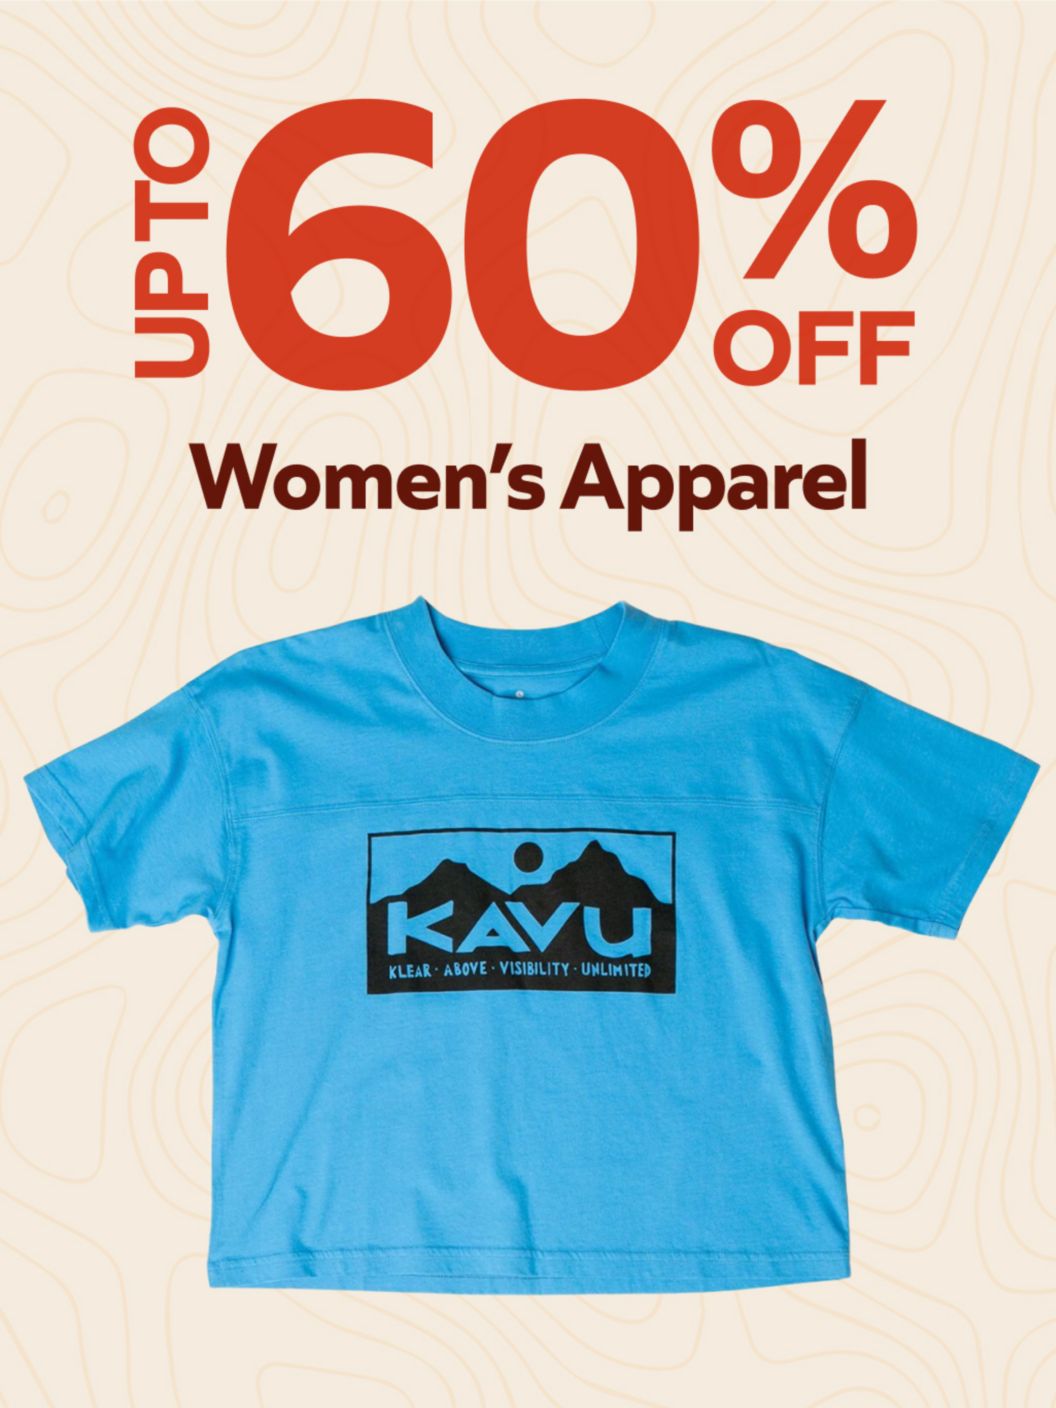 Women's Apparel up to 60% off 